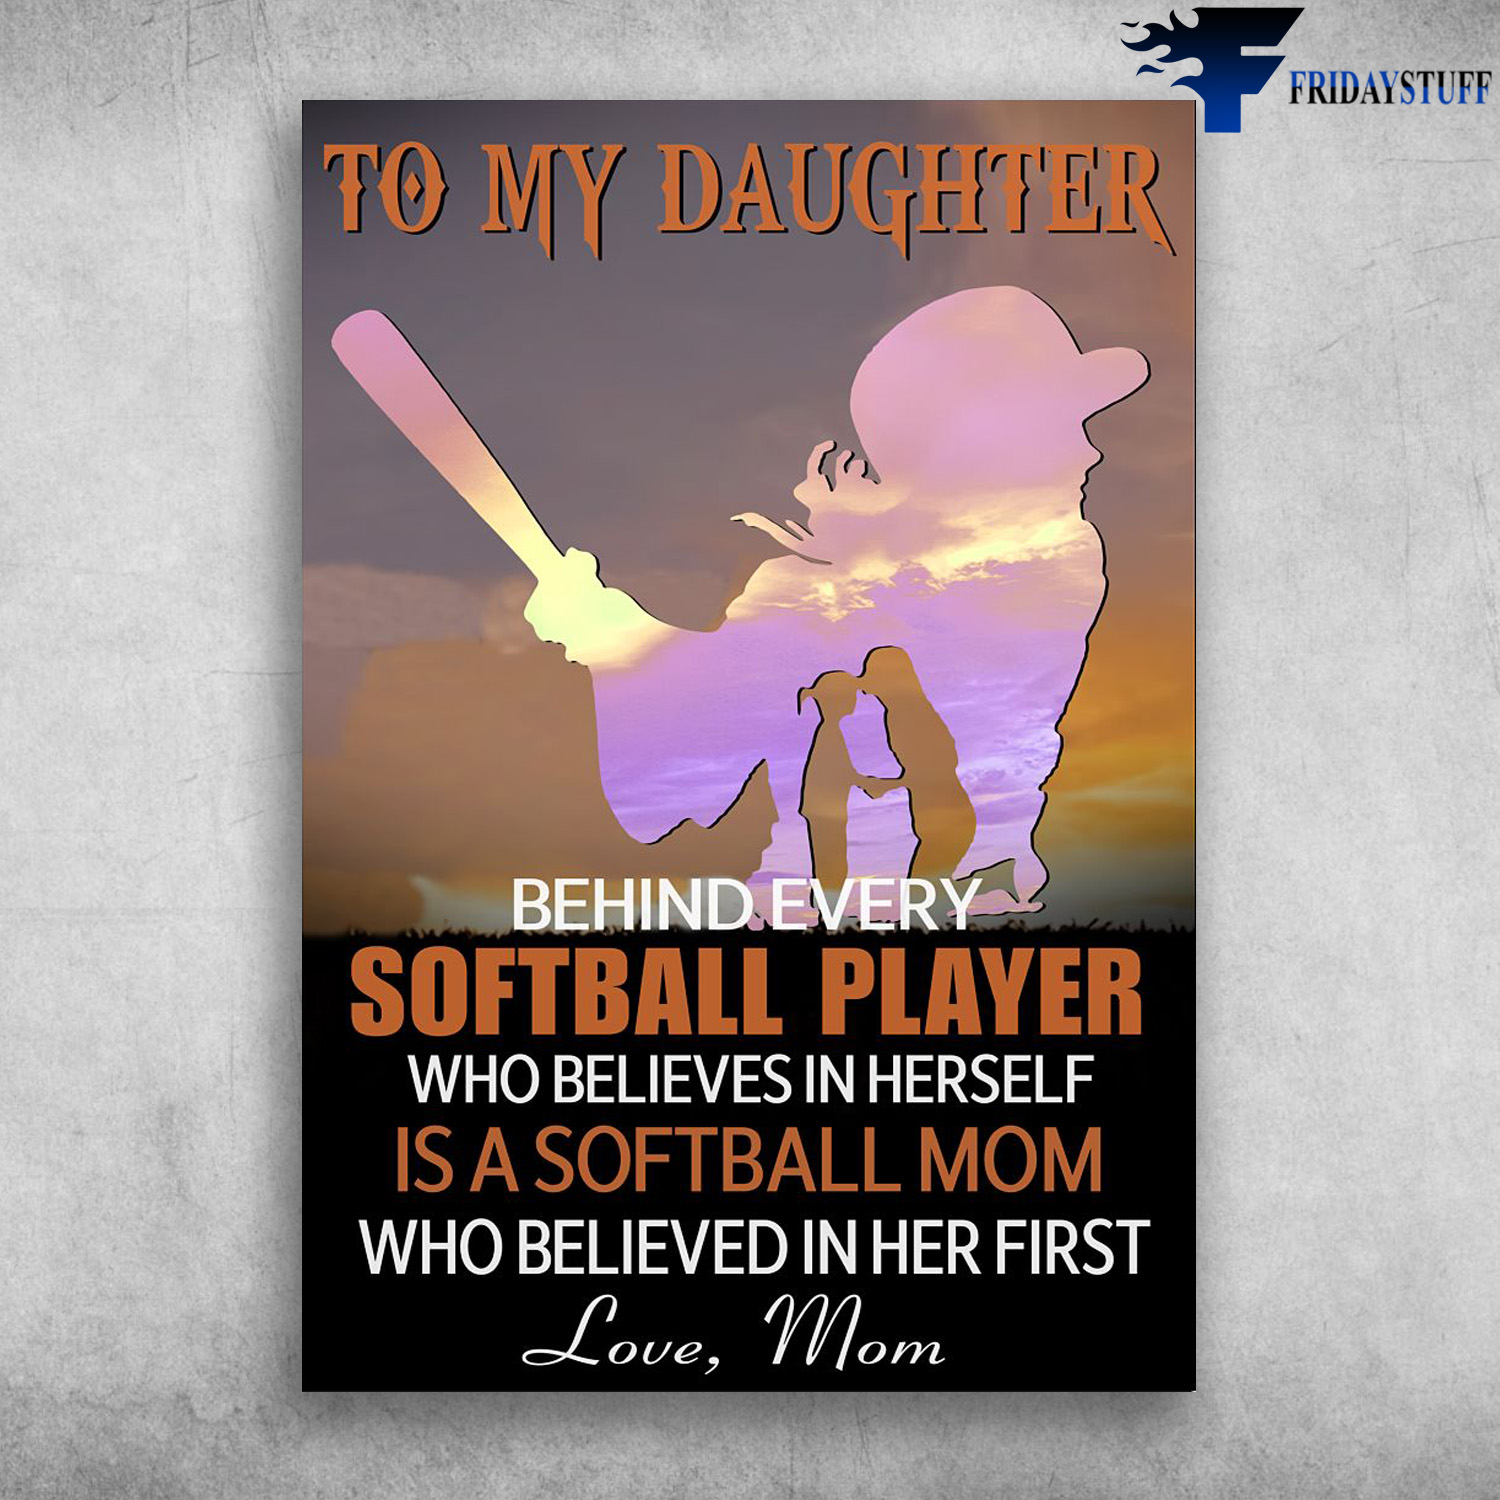 Mom And Daughter Softball, Softball Player - To My Daughter, Behind Every Softball Player, Who Believes In Herself, Is A Softball Mom, Who Believed In Her First, Love Mom